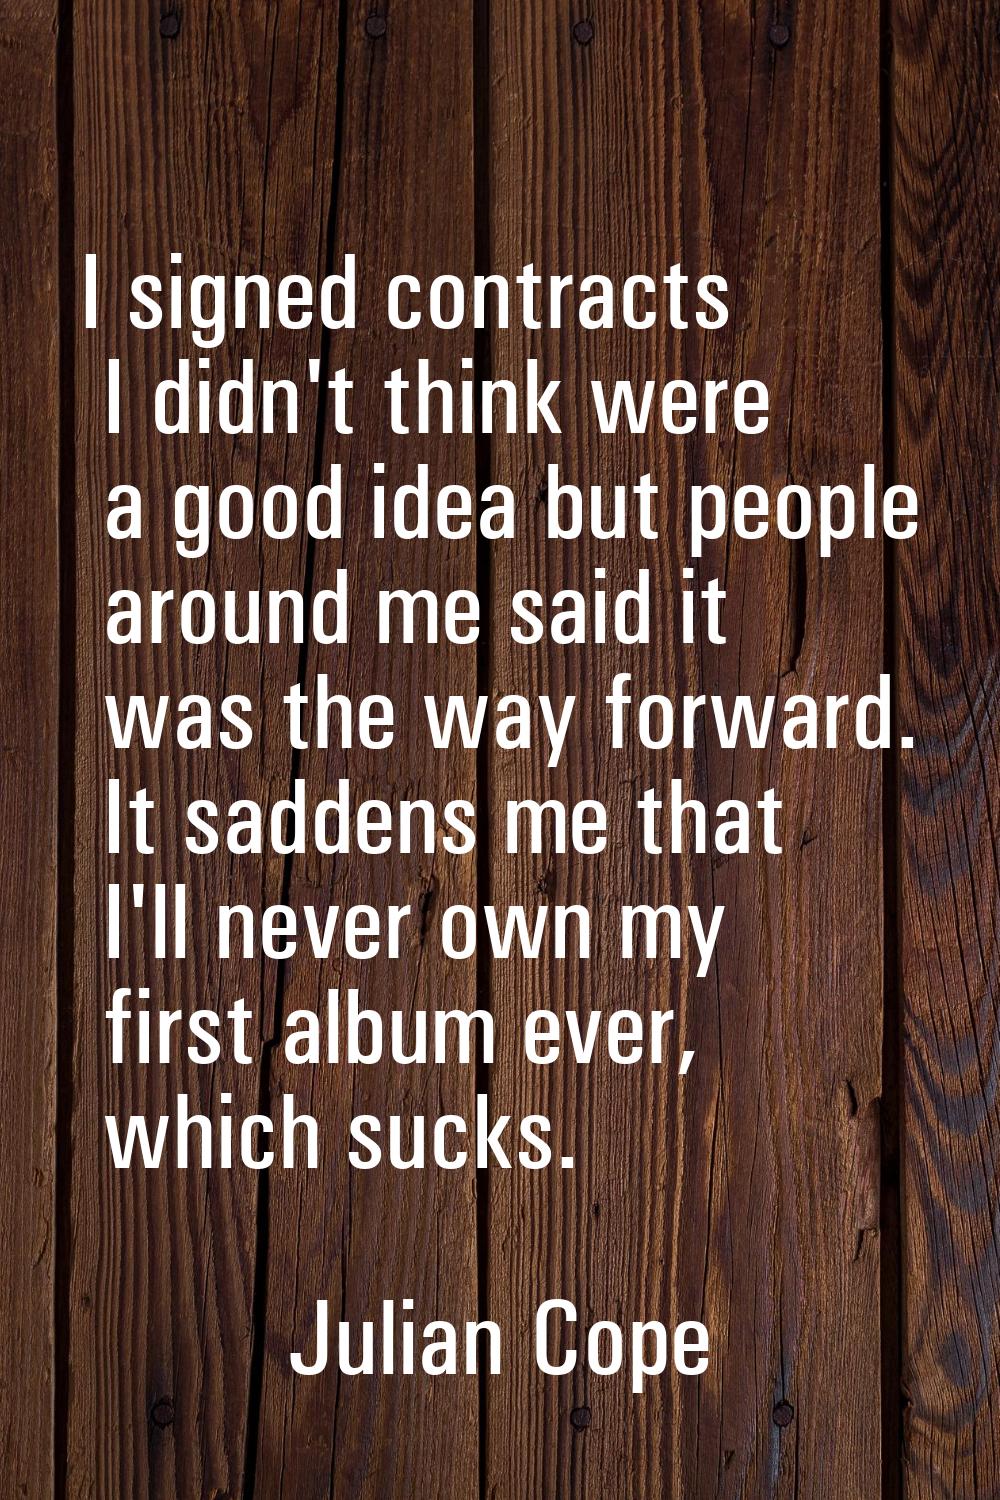 I signed contracts I didn't think were a good idea but people around me said it was the way forward